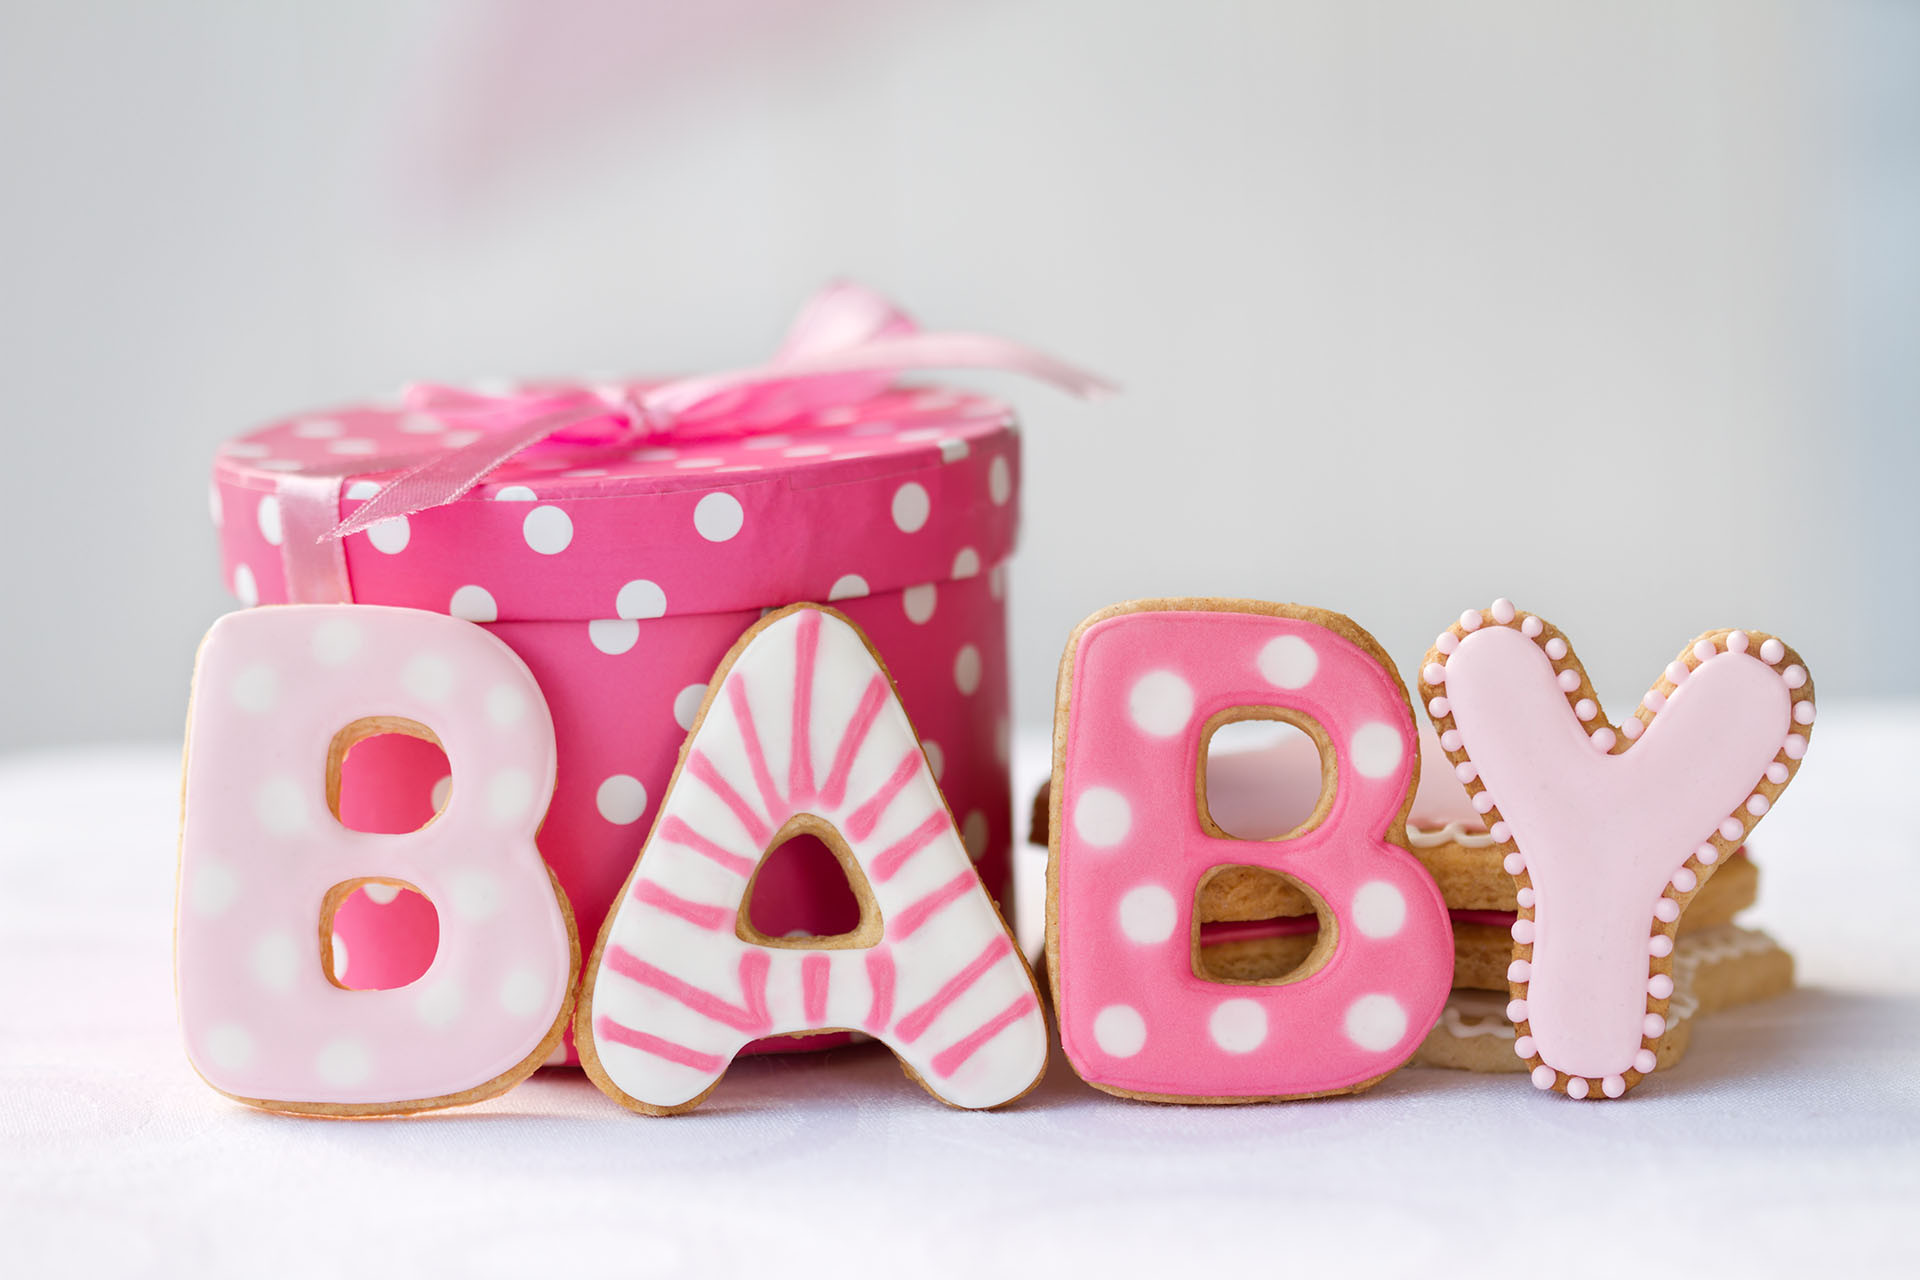 Gift Ideas For A Gender Reveal Party
 Top 5 Gender Reveal Party Gift Ideas